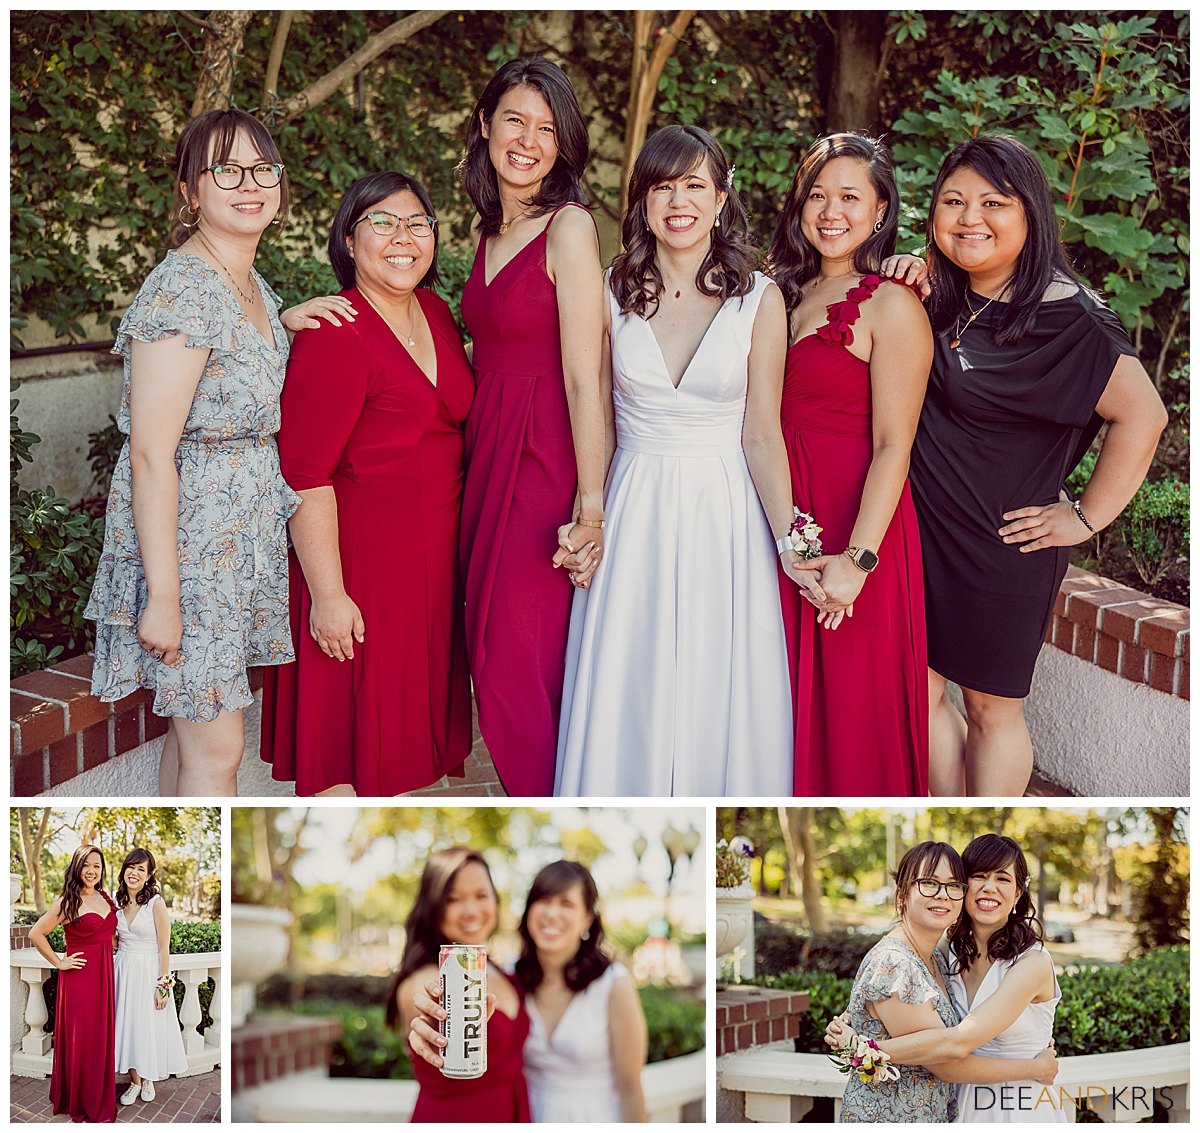 Four images of bride with her bridesmaids.